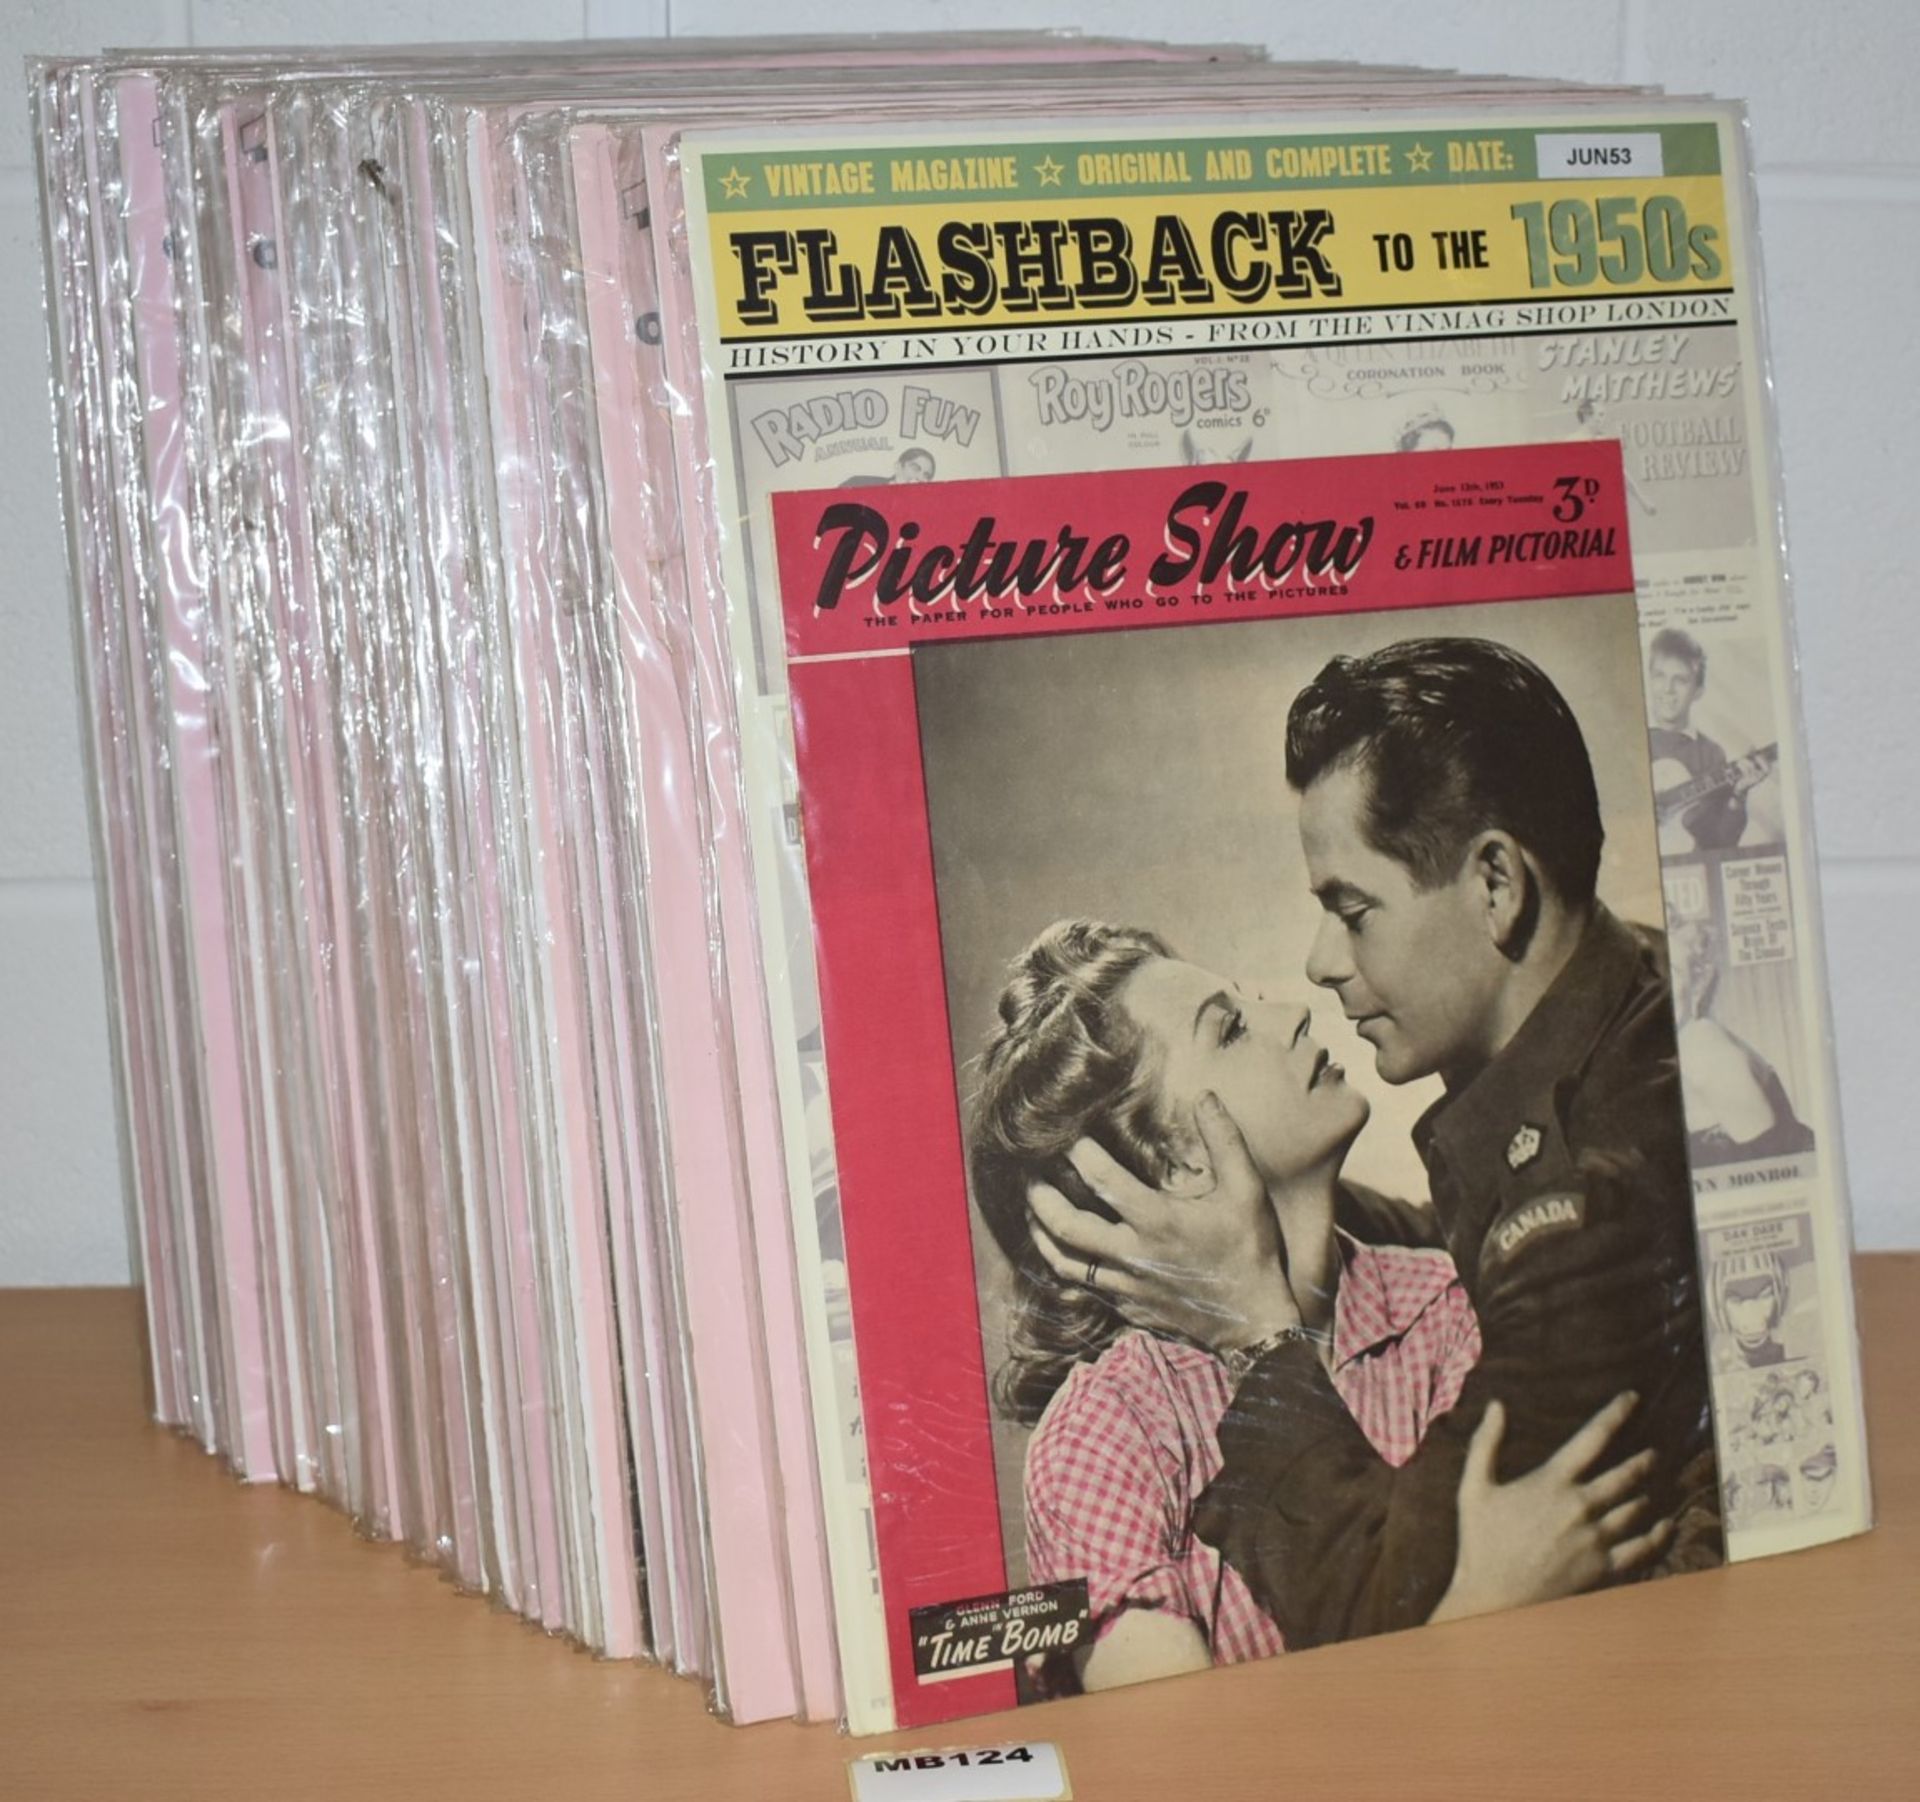 41 x Vintage 1950's Picture Show & Film Pictorial Magazines Dated 1950 to 1958 - Ref MB124 - CL431 -